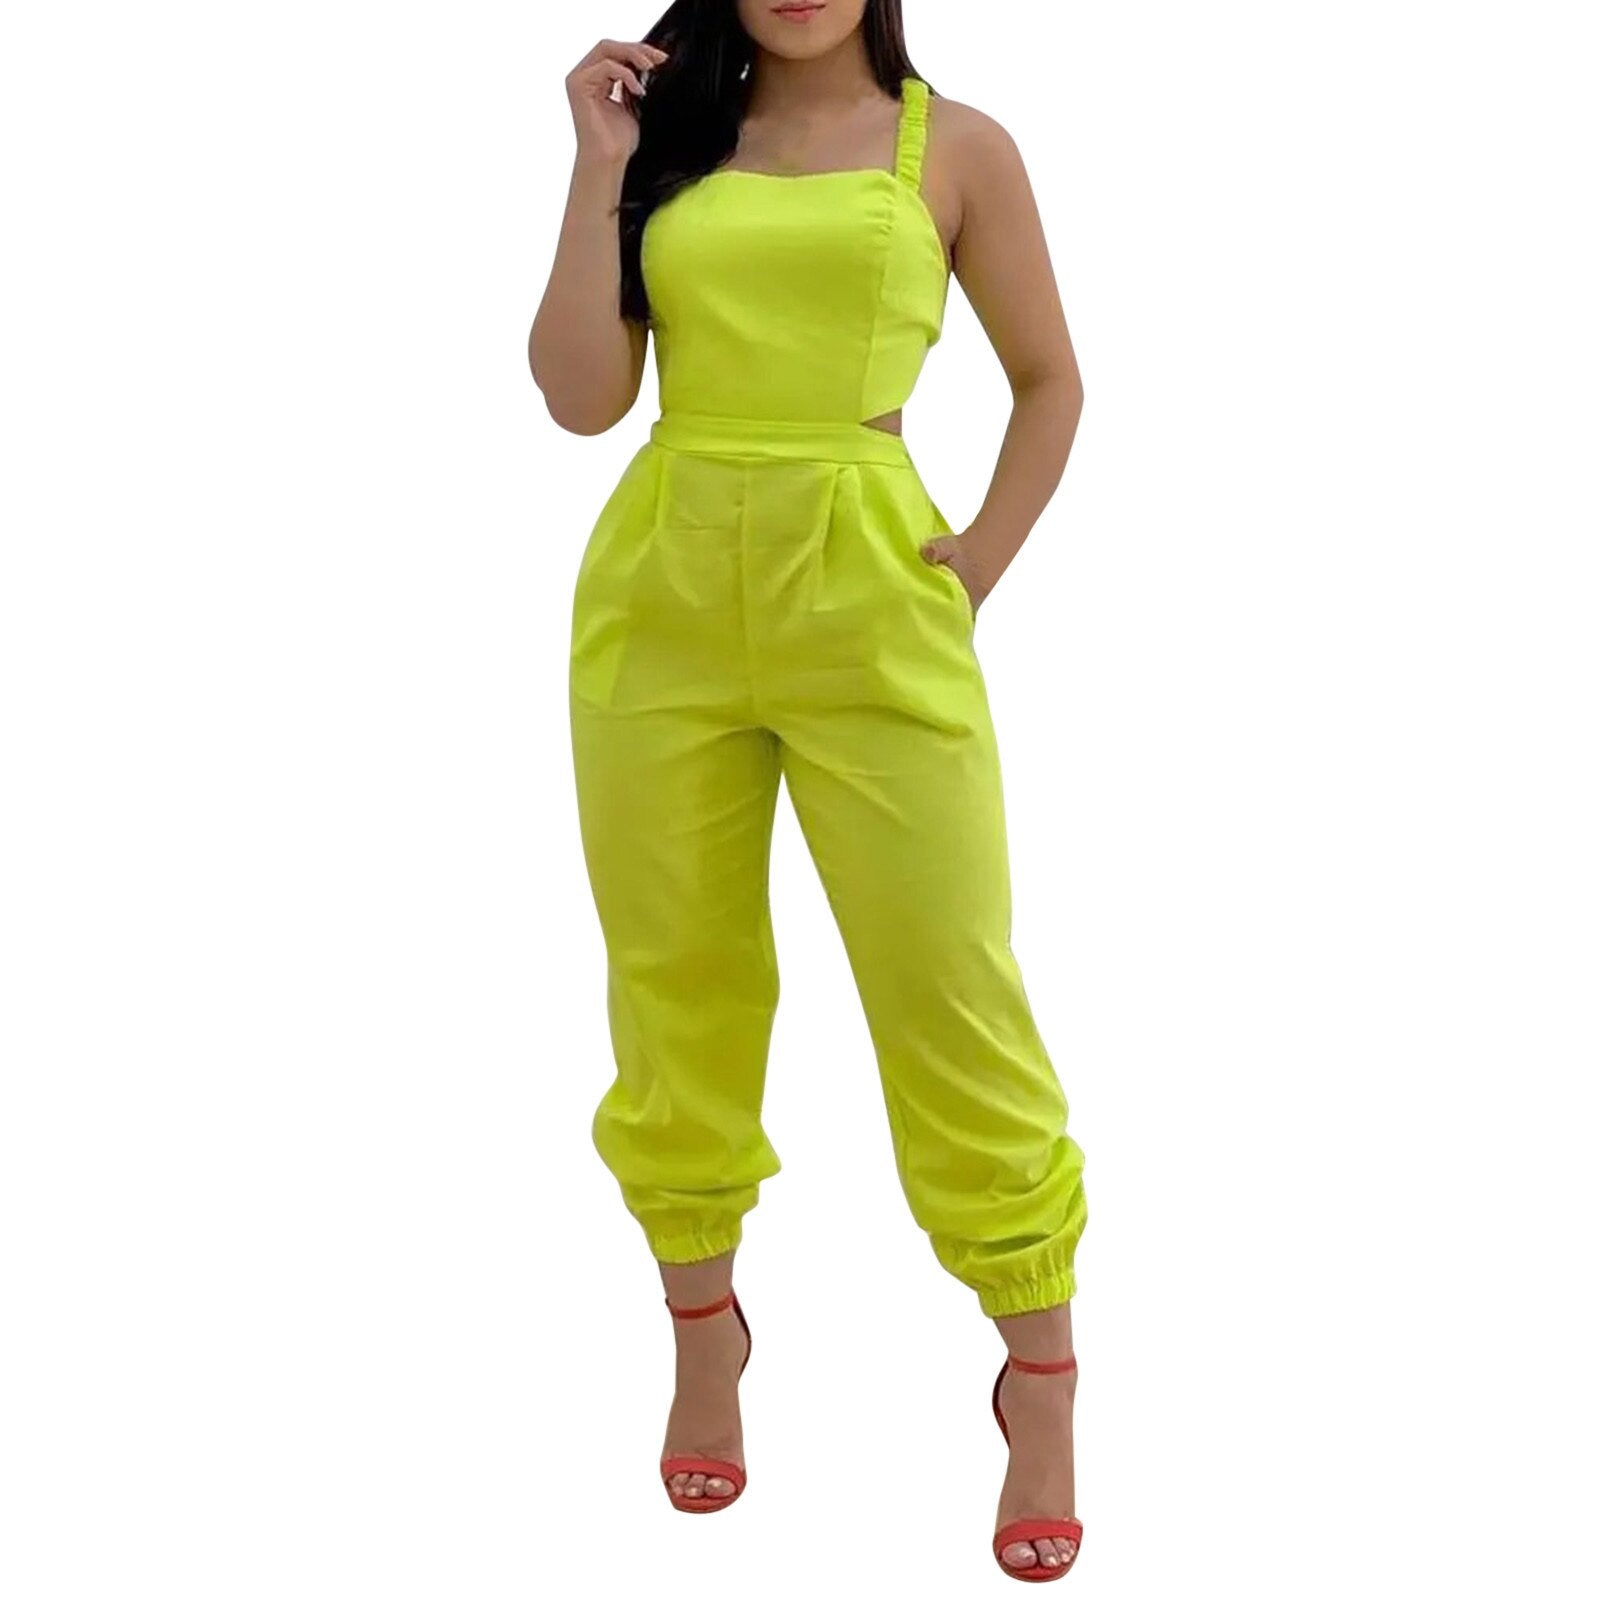 Women Daily Summer Casual Jumpsuit O Neck Sleeveless Waist Micro Band Cross Tied Slim Fit cargo pant Rompers Backless Jumpsuits